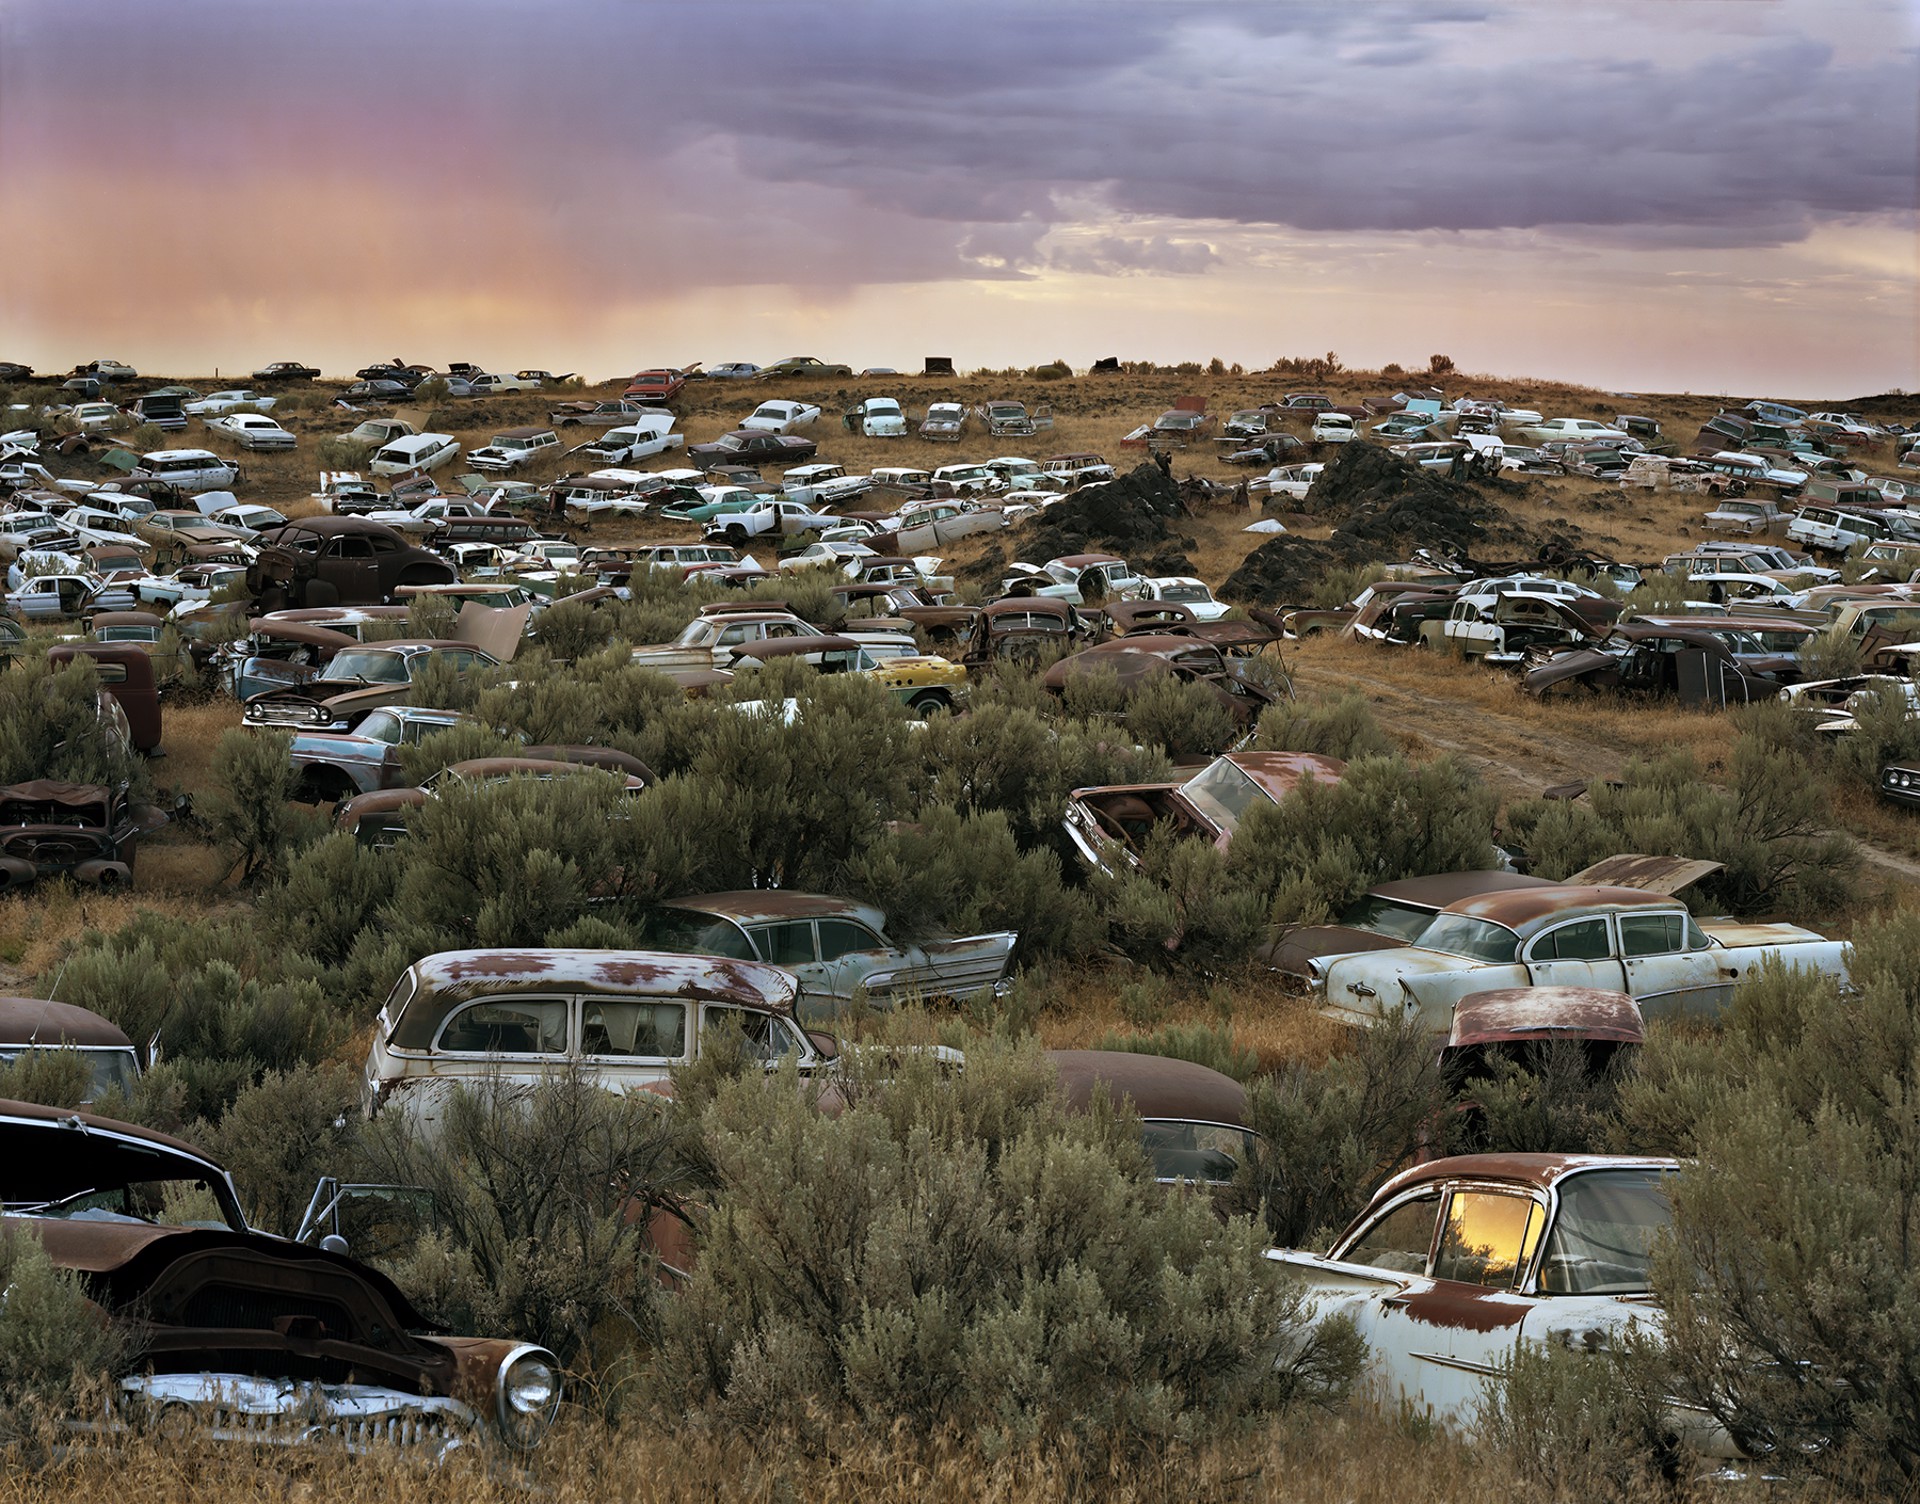 L&L Classic Auto Salvage, Gooding County, Idaho, 2015   4/5 by Laura McPhee